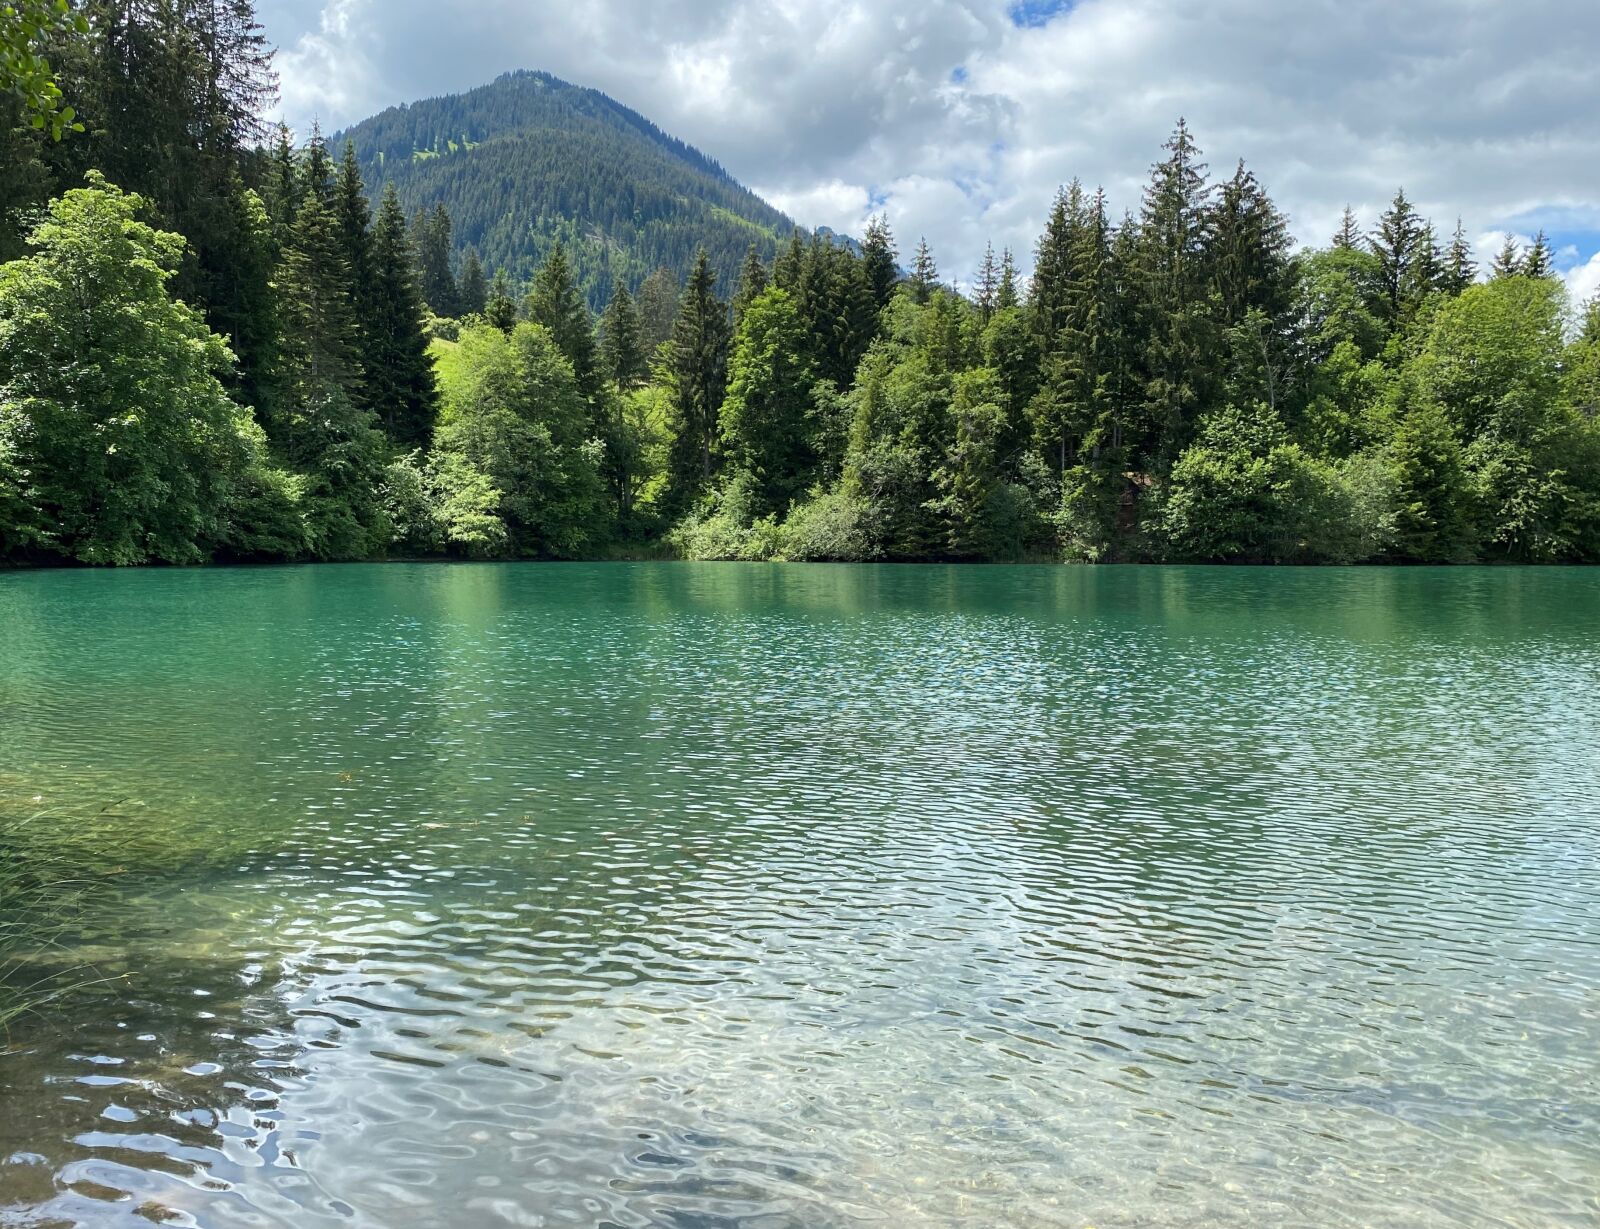 iPhone 11 Pro Max back triple camera 4.25mm f/1.8 sample photo. Bergsee, nature, hiking photography